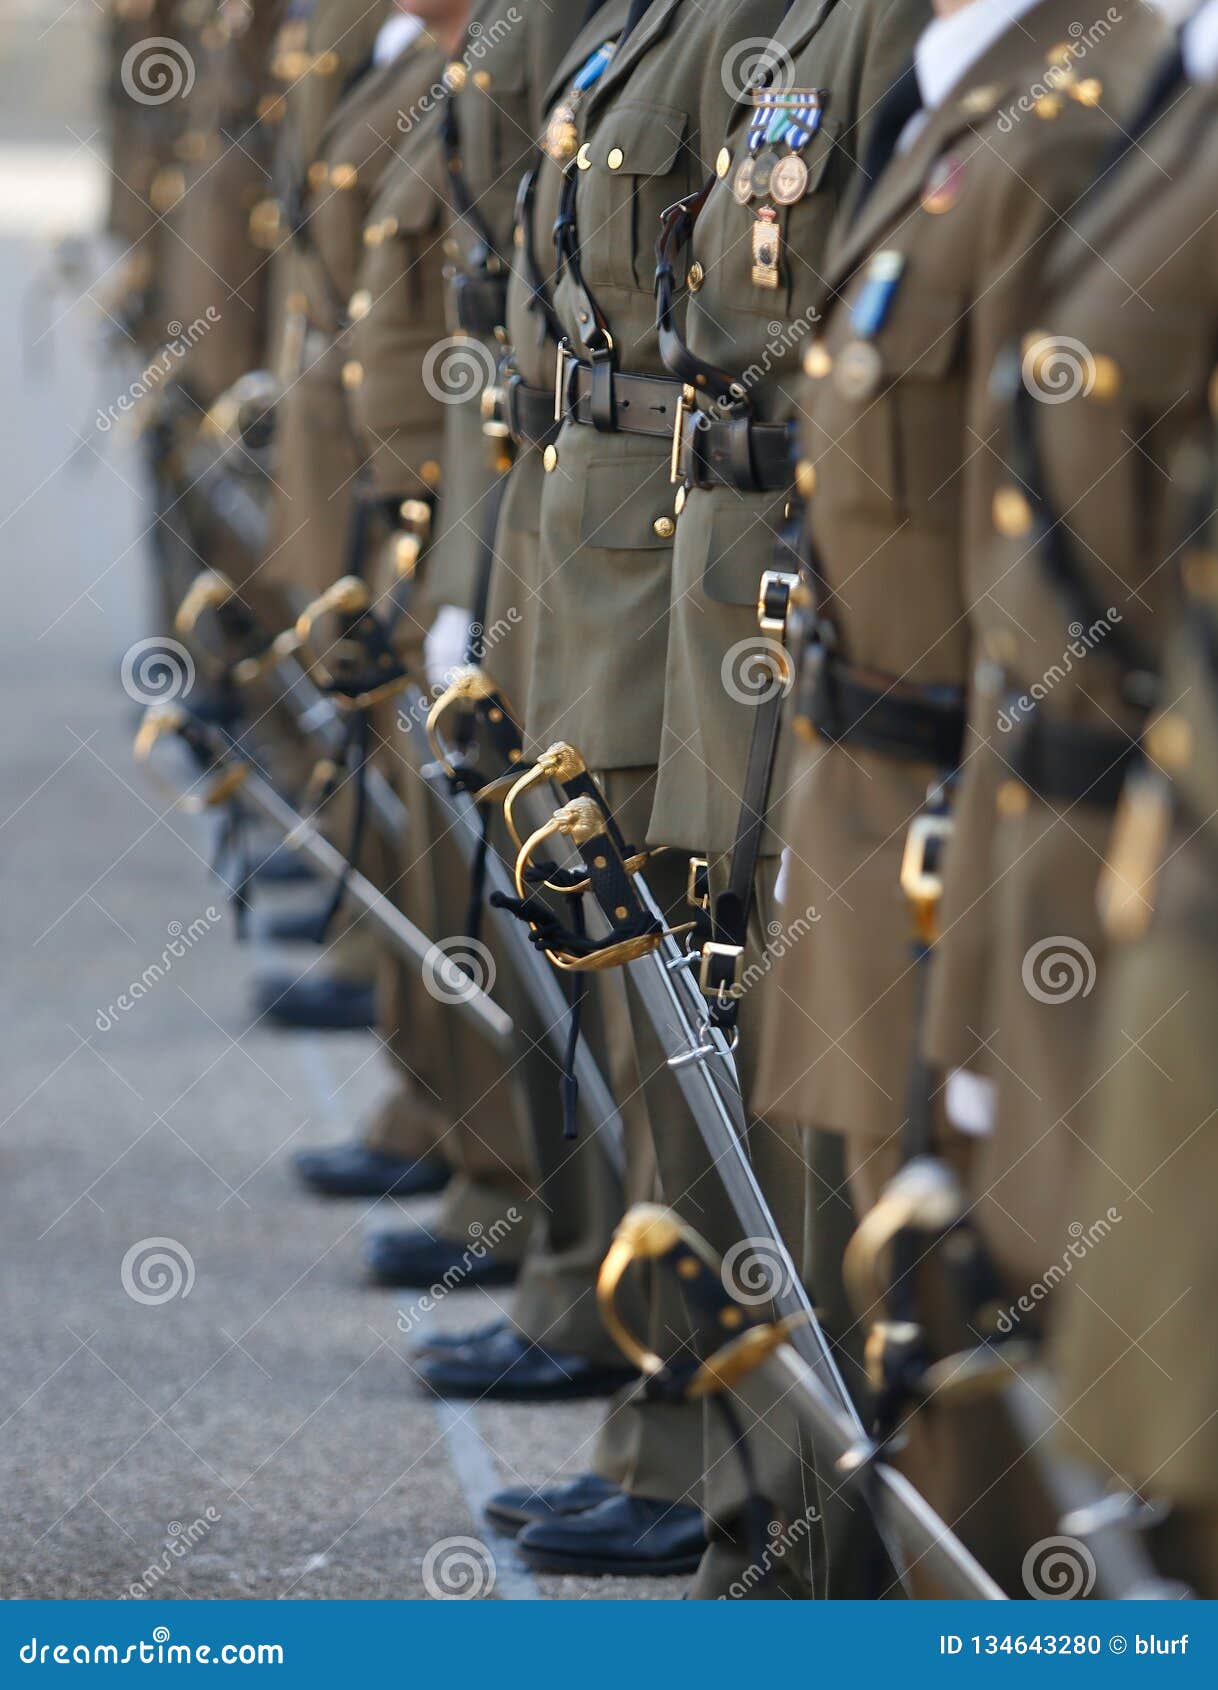 Spanish Army Uniform Detail Vertical Image - of military, formed: 134643280